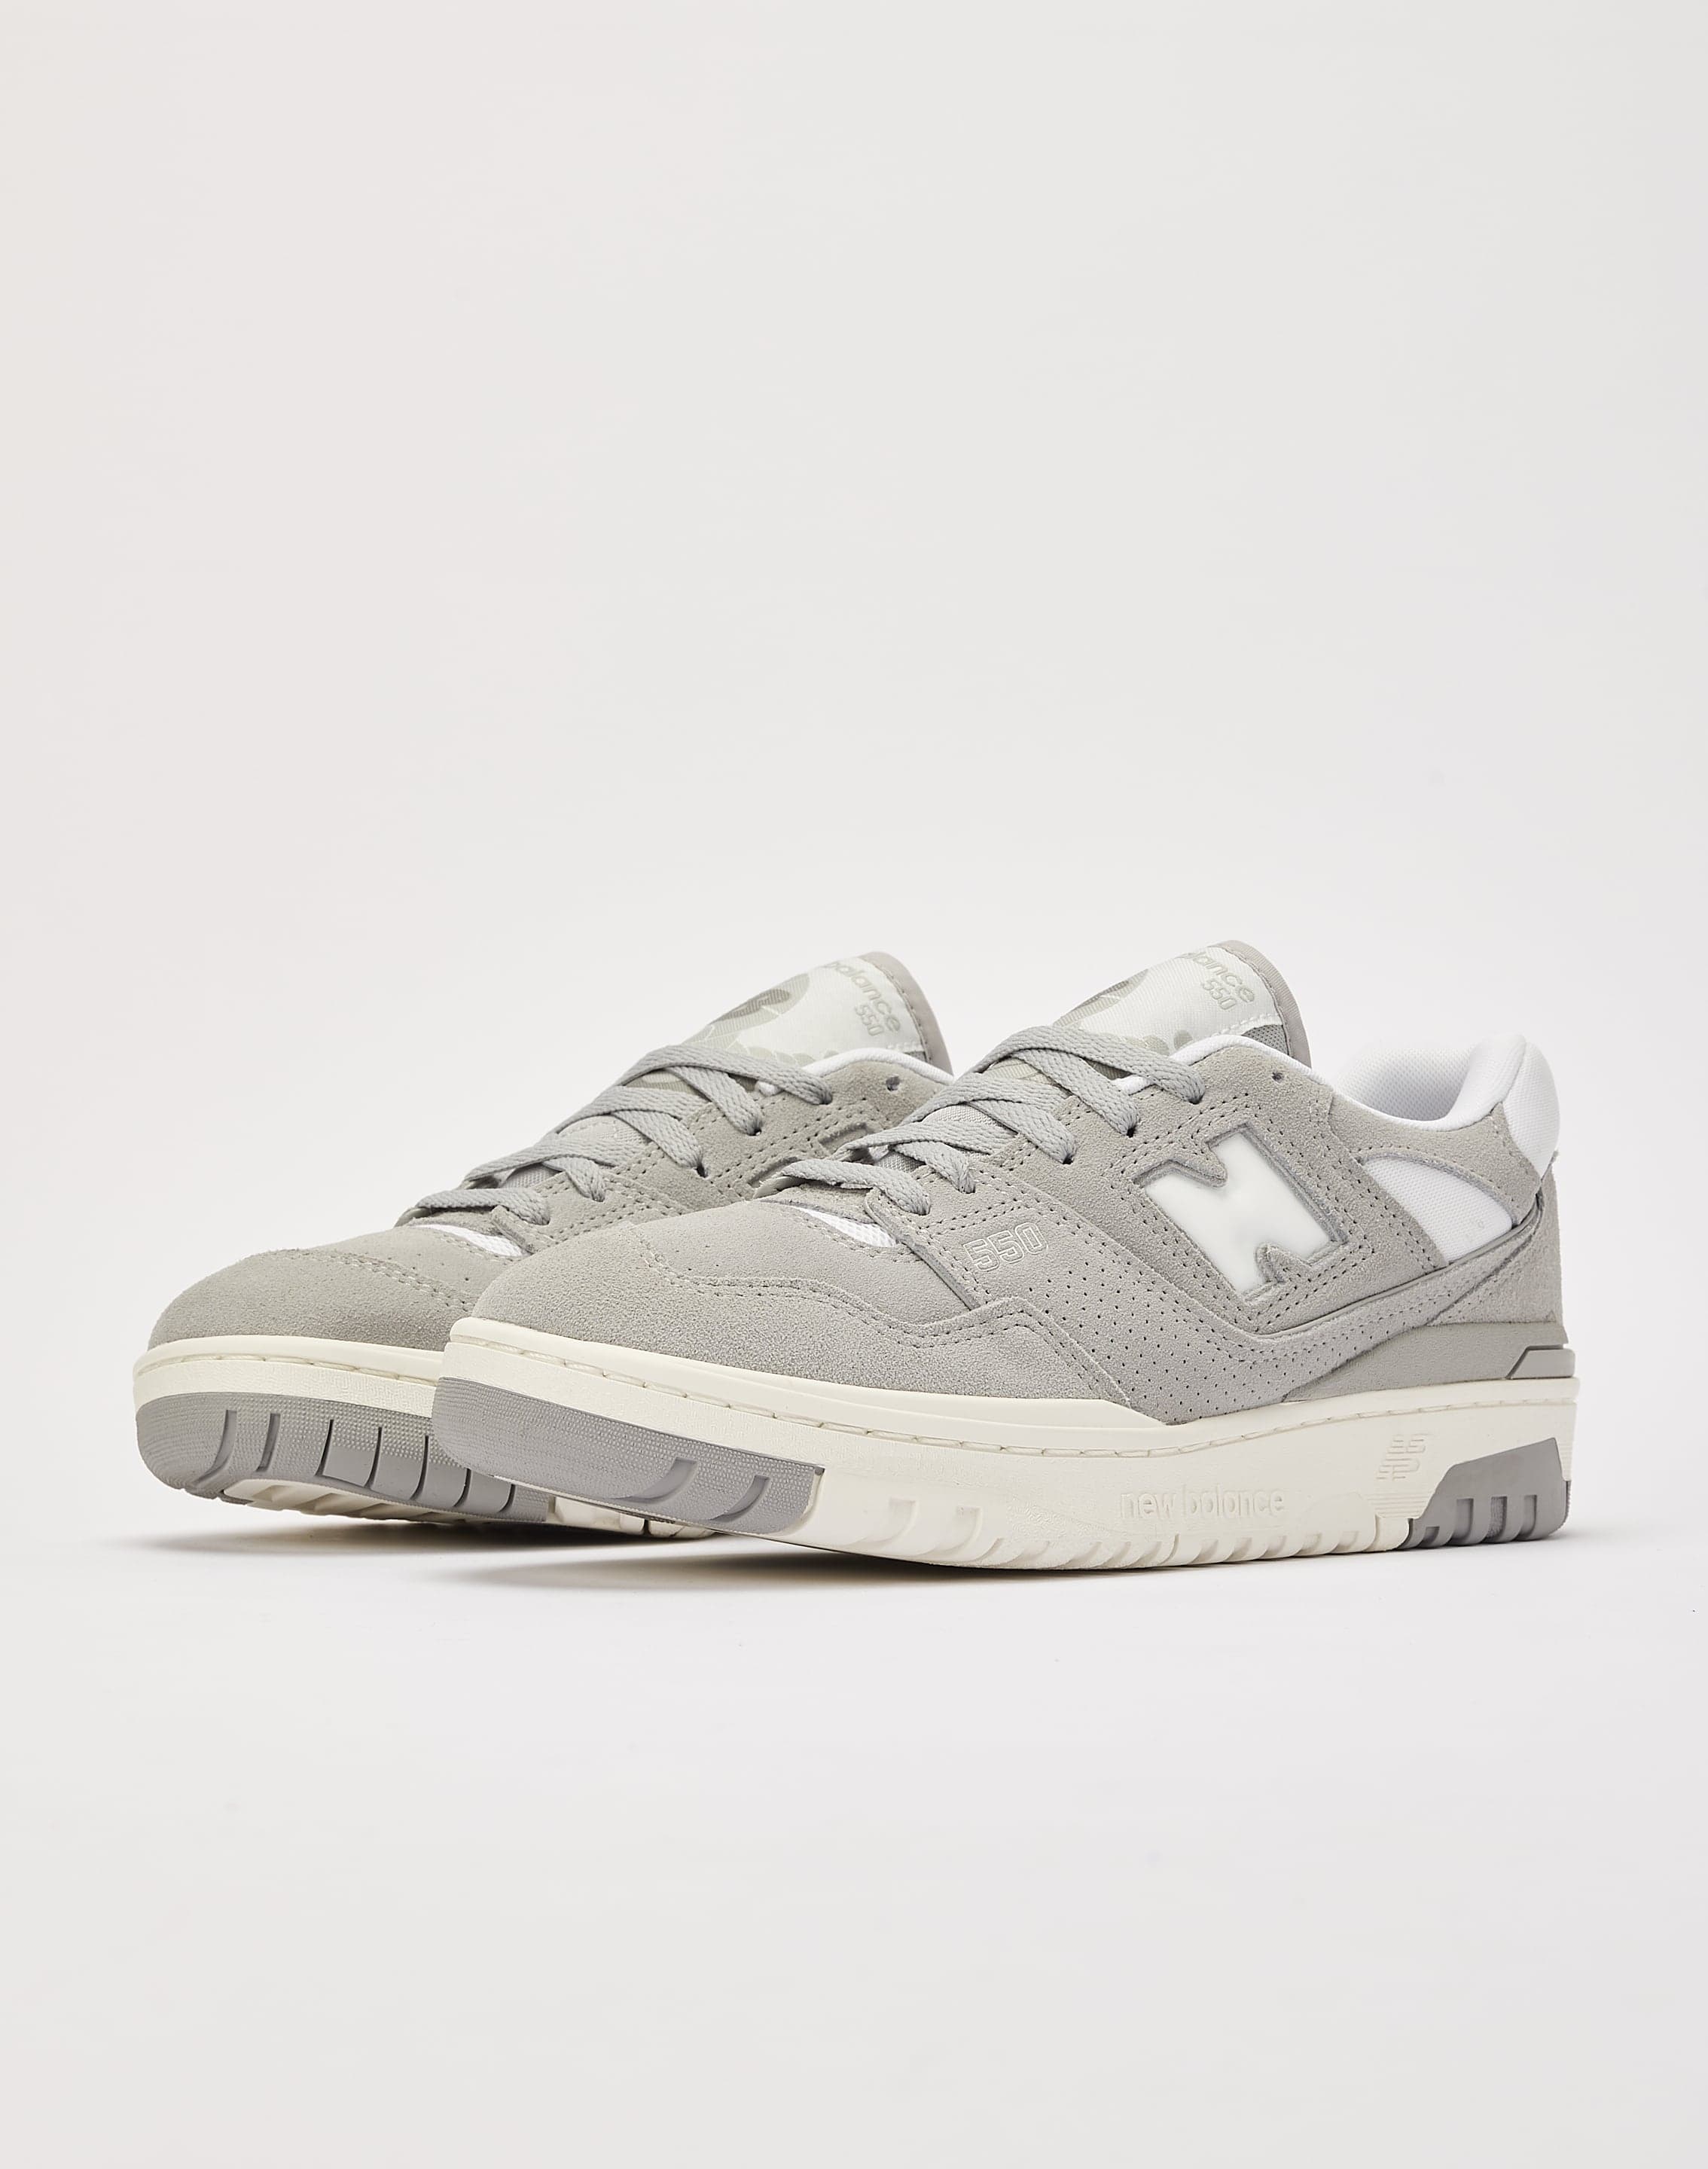 HERE TO STAY: NEW BALANCE BB550 – Streetwear & Sneaker Blog